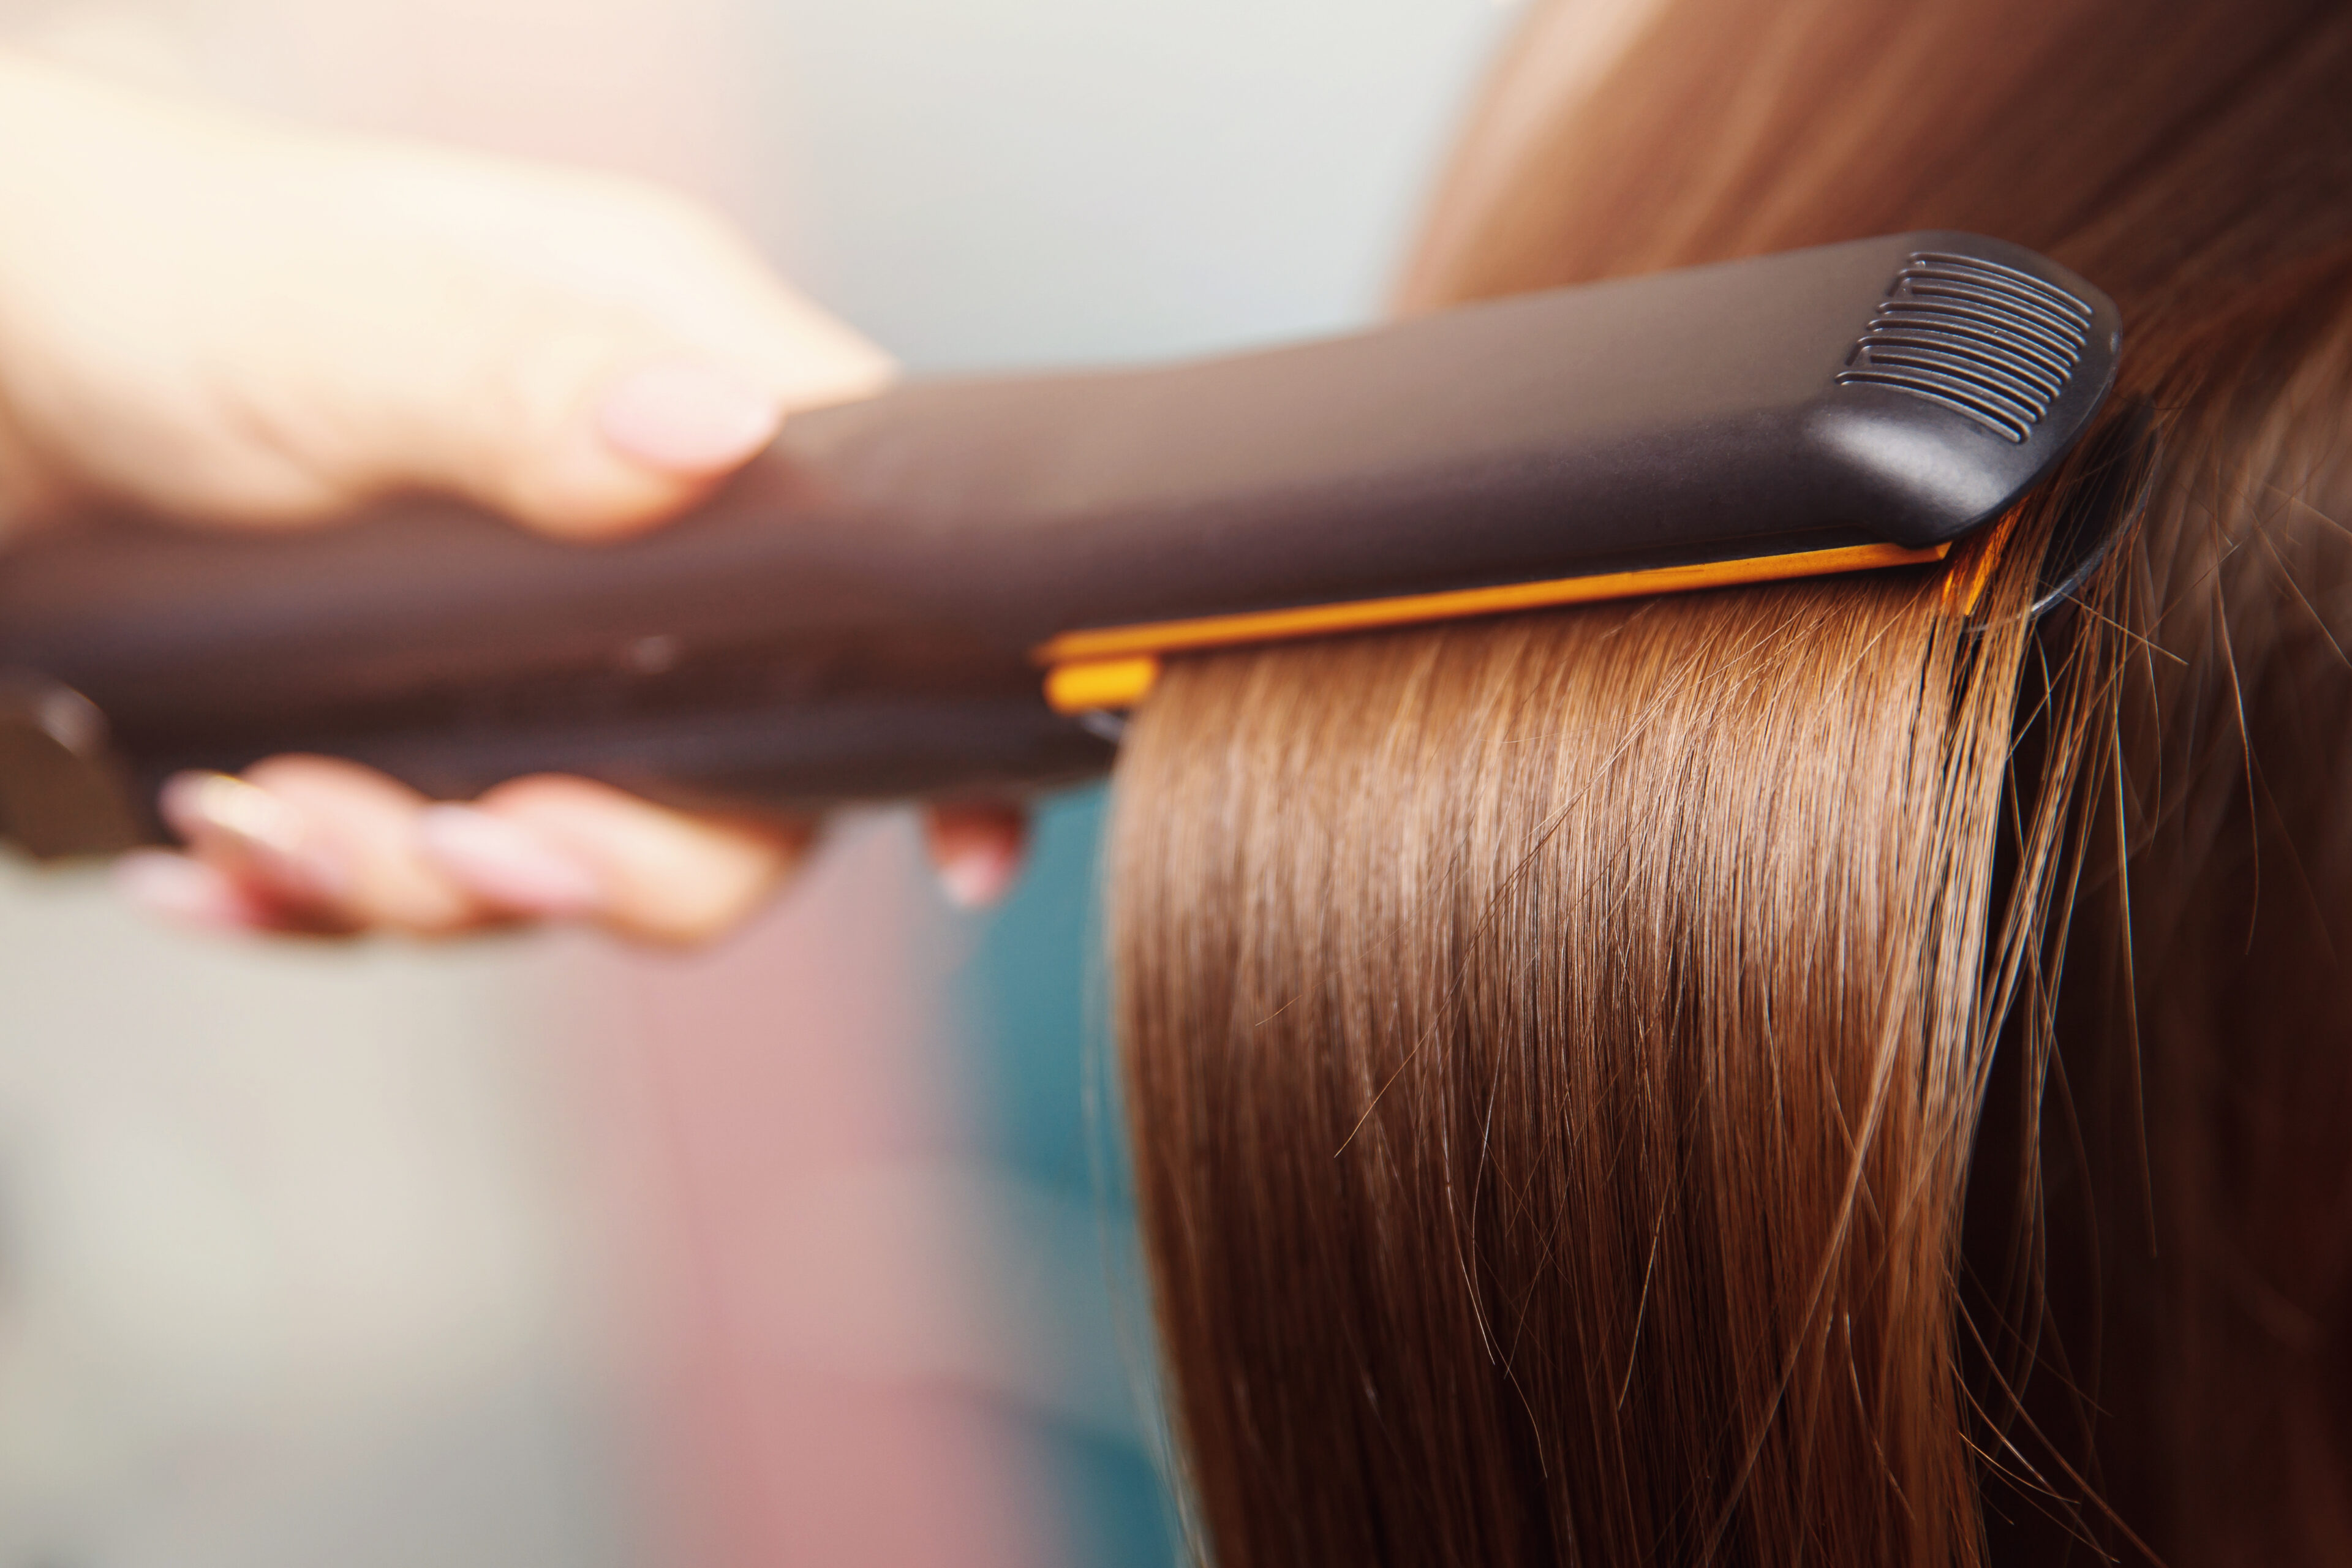 Avoid using the flat iron tool to style hair